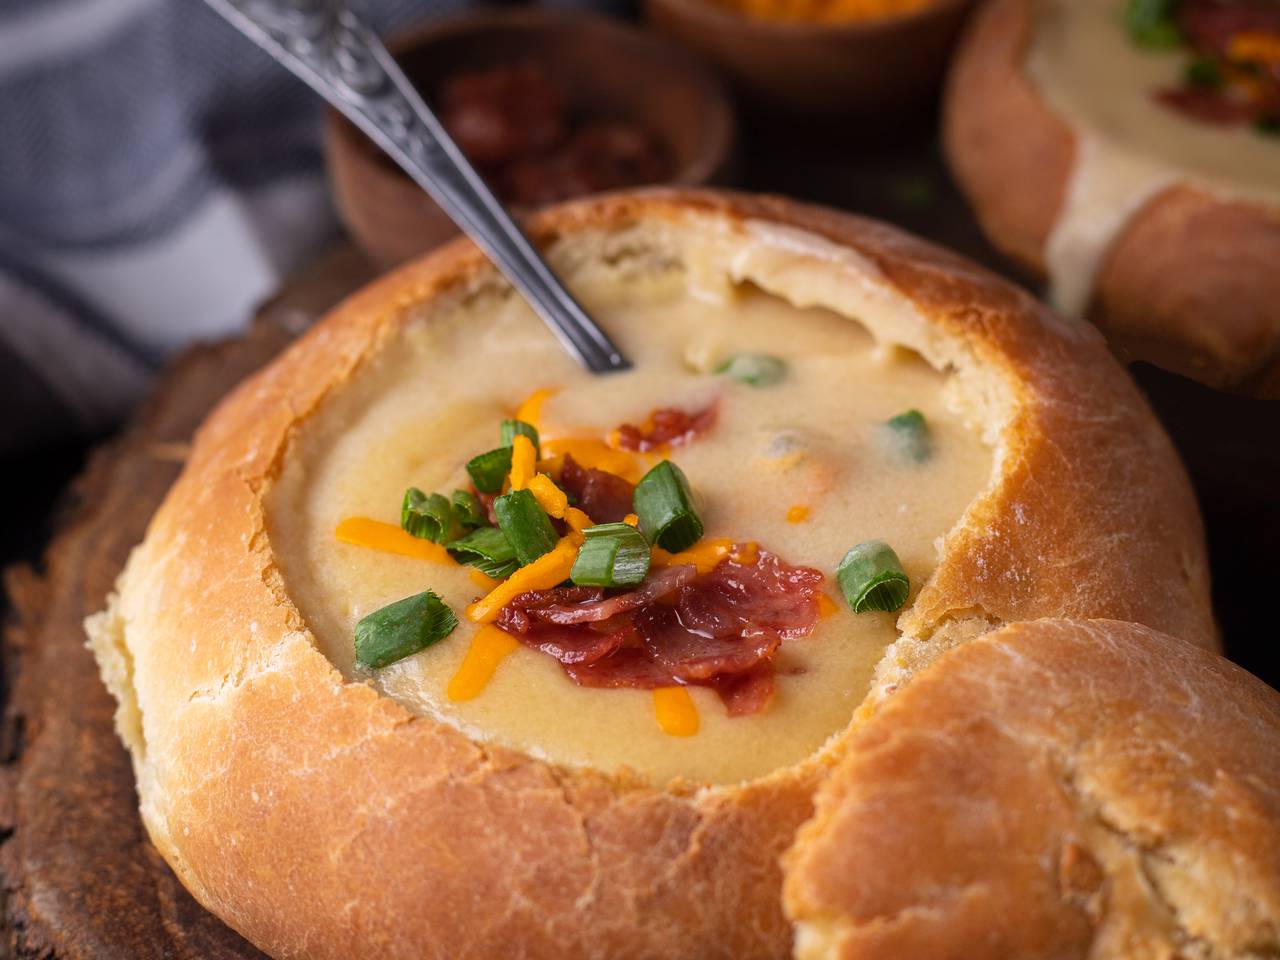 Creamy Potato Soup with Cheddar Cheese